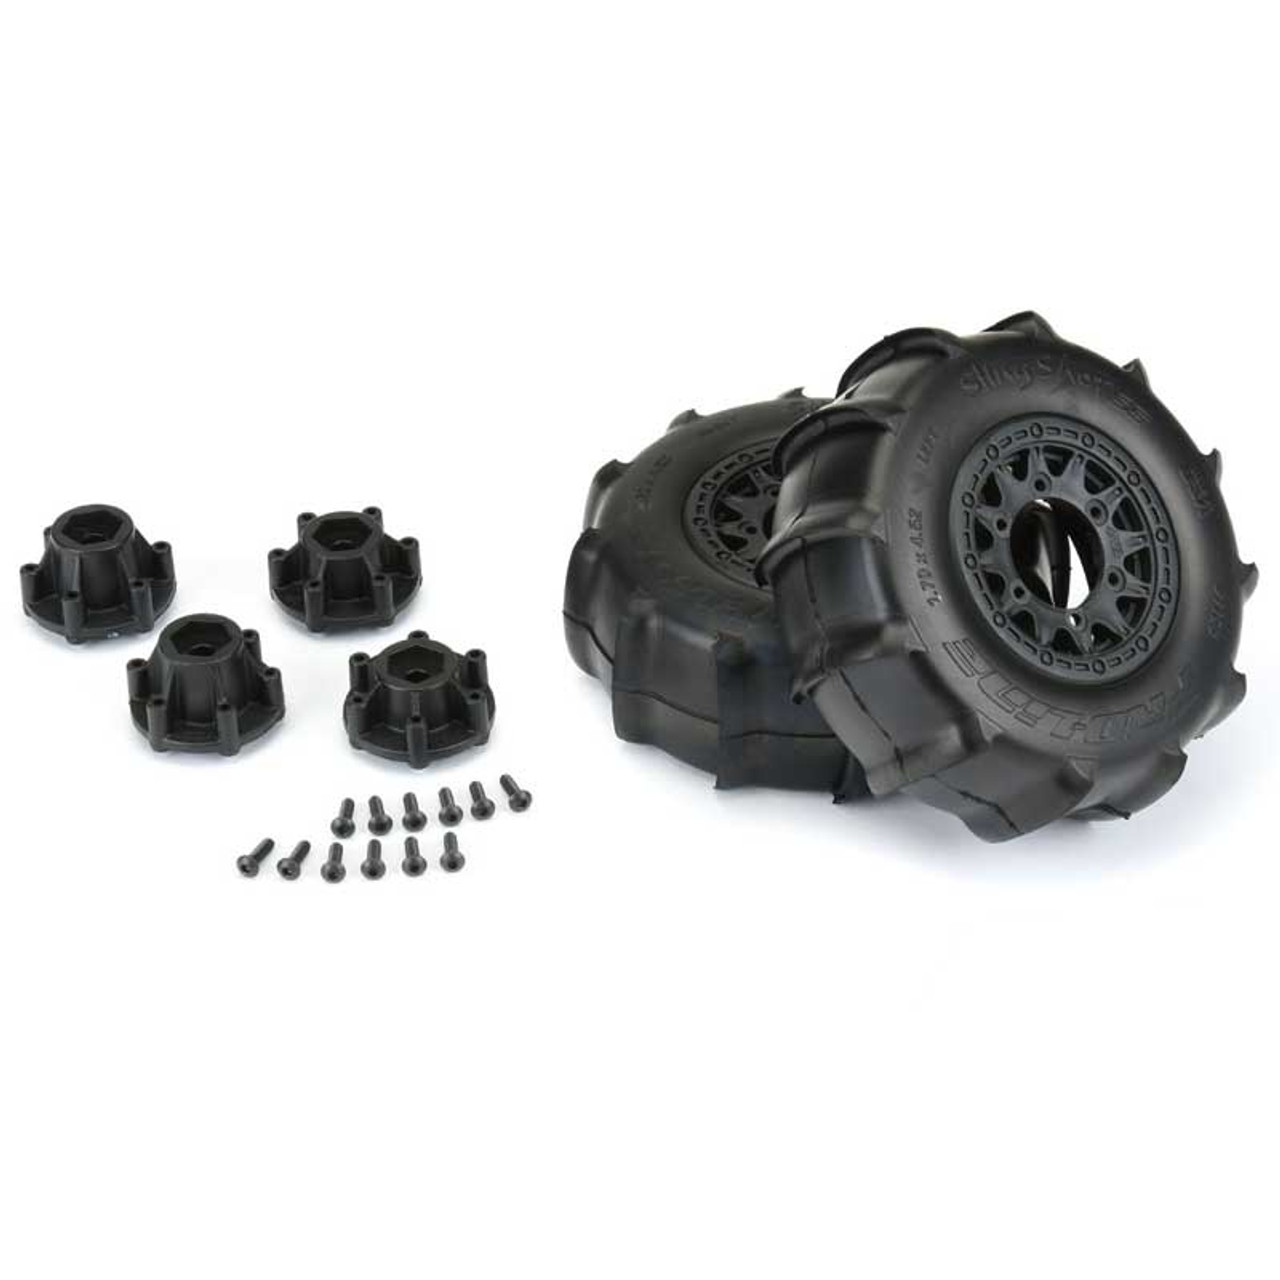 rc car with paddle tires